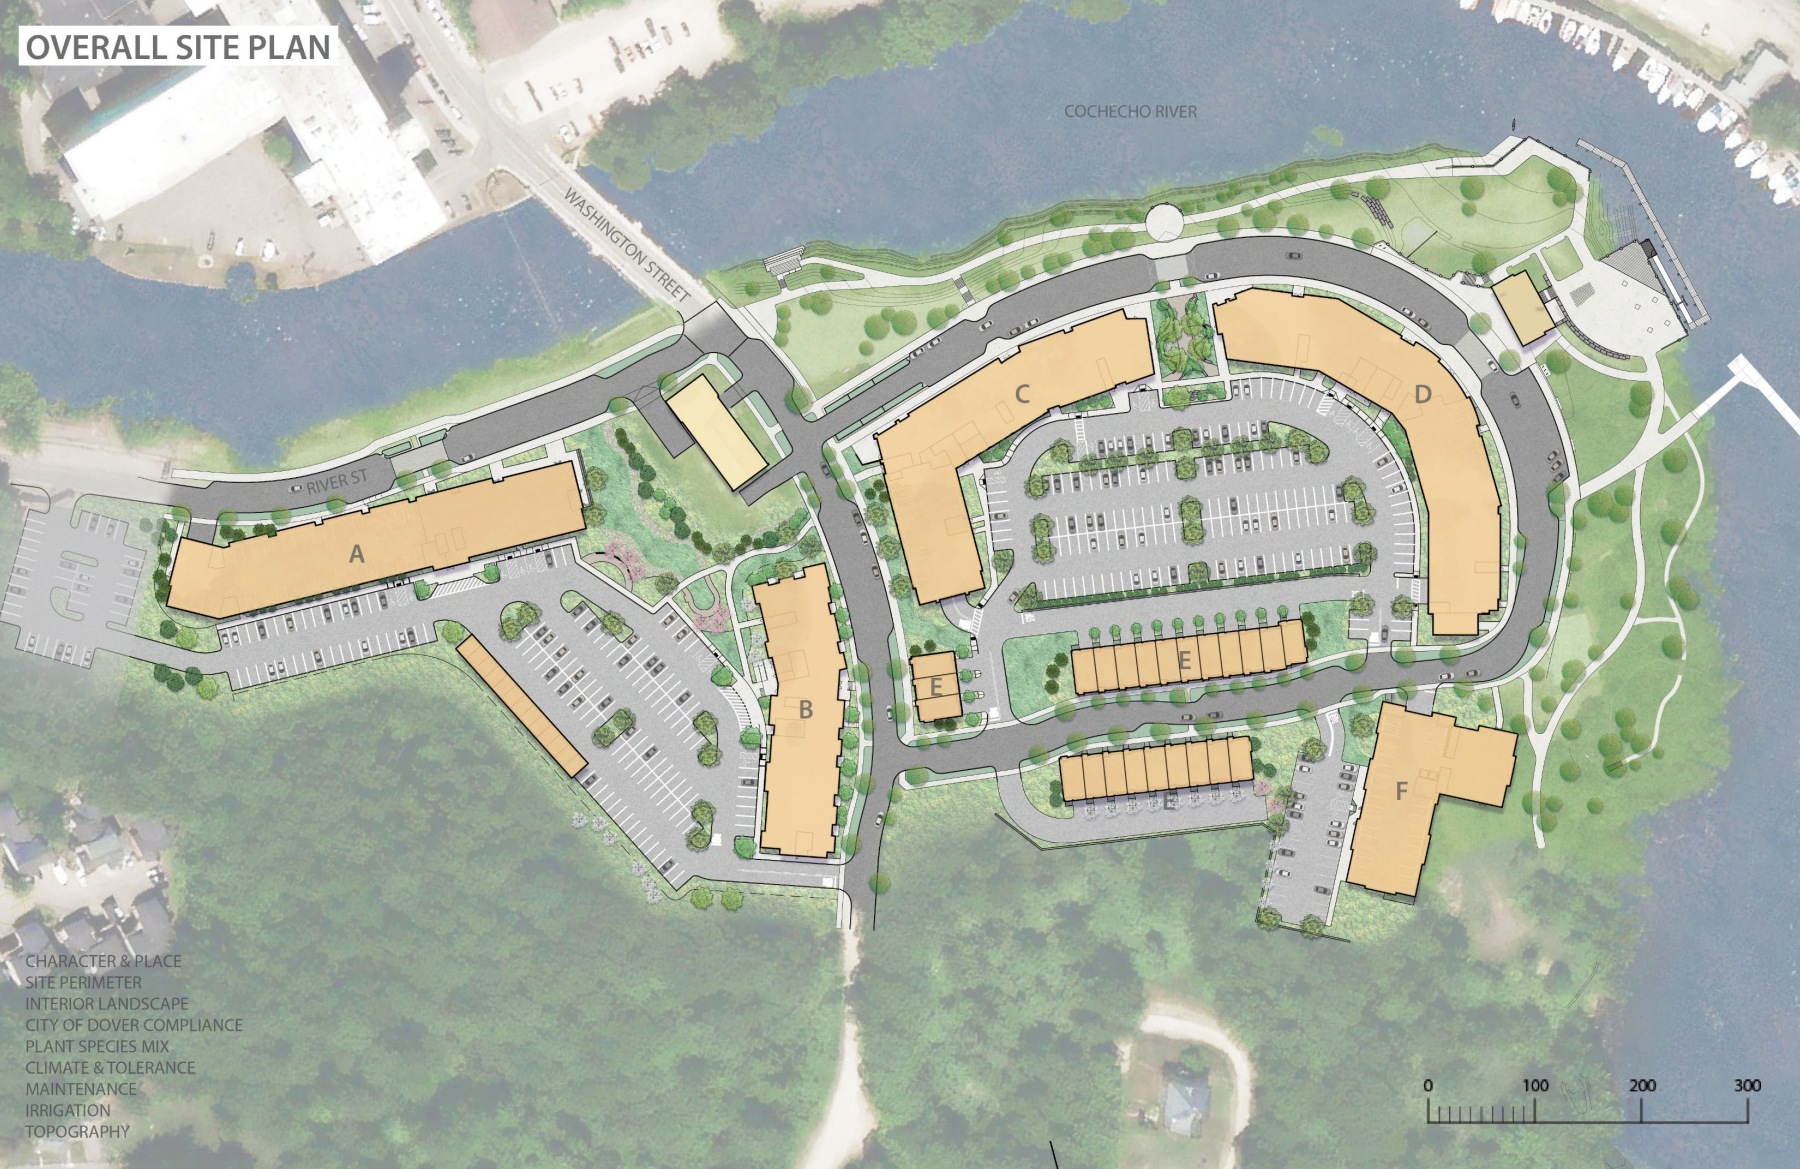 Overall Site Plan of the waterfront development featuring structures along the cocheco river